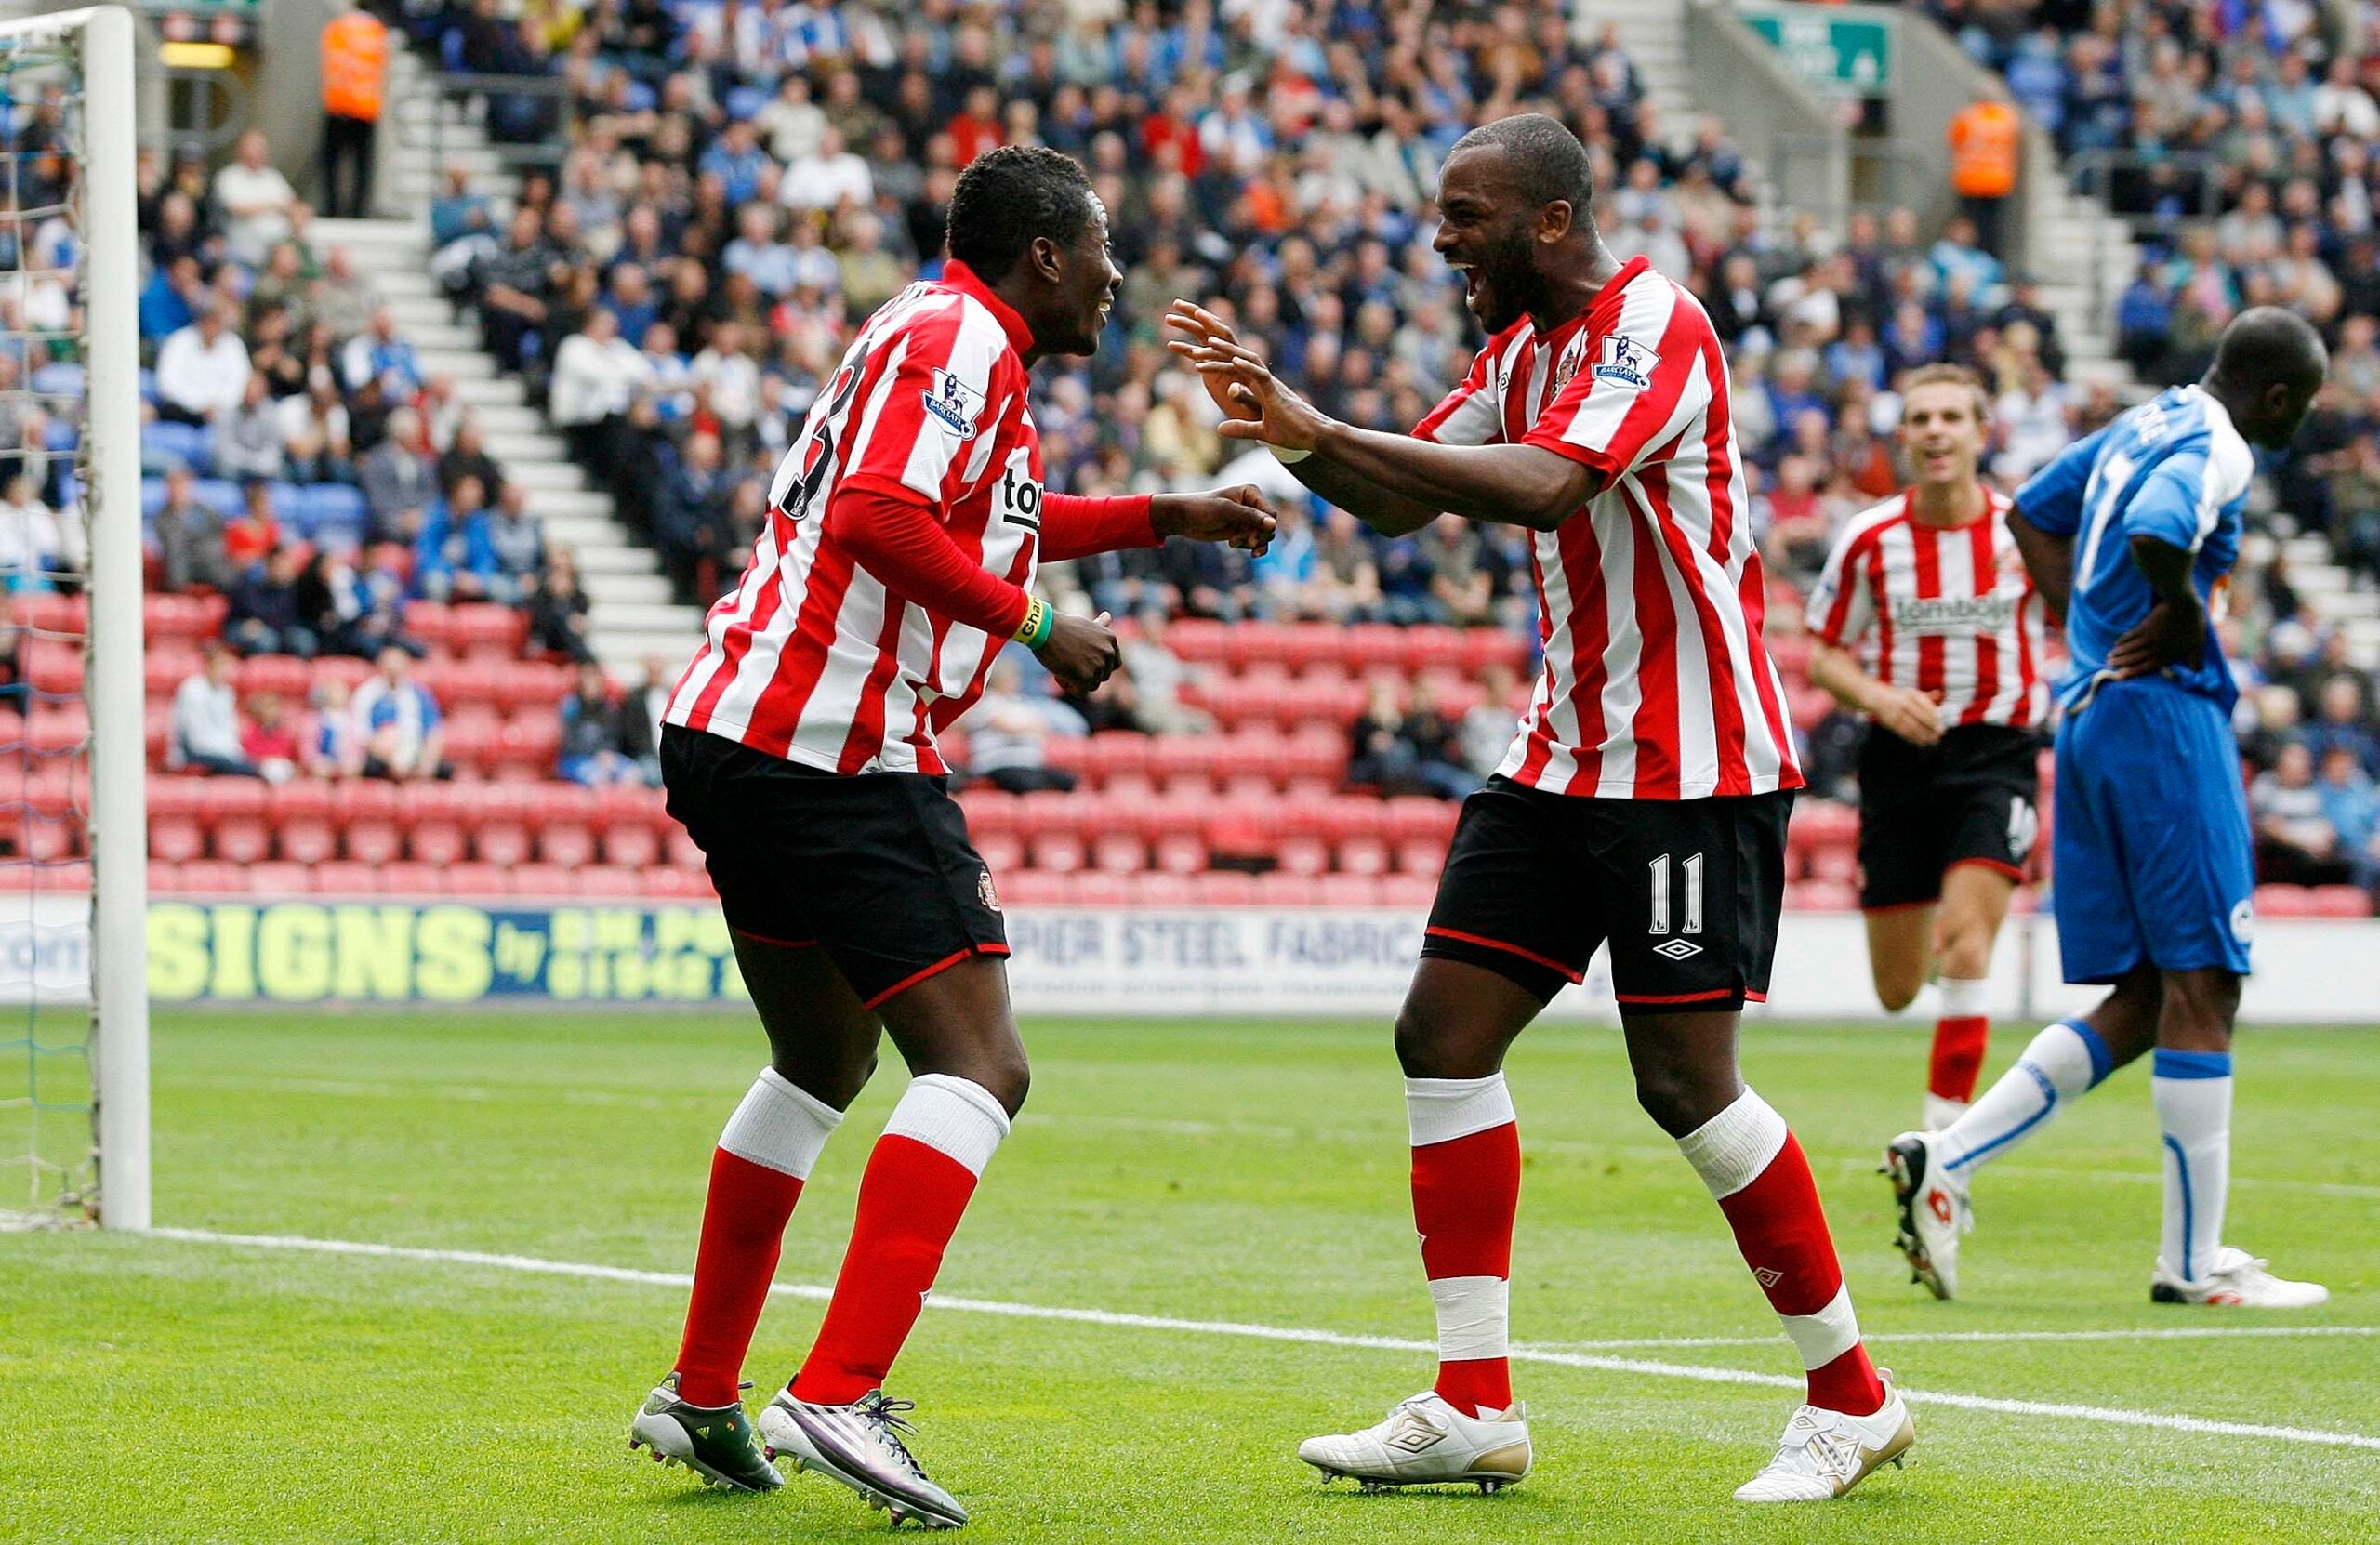 Football - Wigan Athletic v Sunderland Barclays Premier League - DW Stadium - 10/11 - 11/9/10 
Asamoah Gyan (L) celebrates with Darren Bent after scoring Sunderland's first goal 
Mandatory Credit: Action Images / Paul Thomas 
Livepic 
NO ONLINE/INTERNET USE WITHOUT A LICENCE FROM THE FOOTBALL DATA CO LTD. FOR LICENCE ENQUIRIES PLEASE TELEPHONE +44 (0) 207 864 9000.